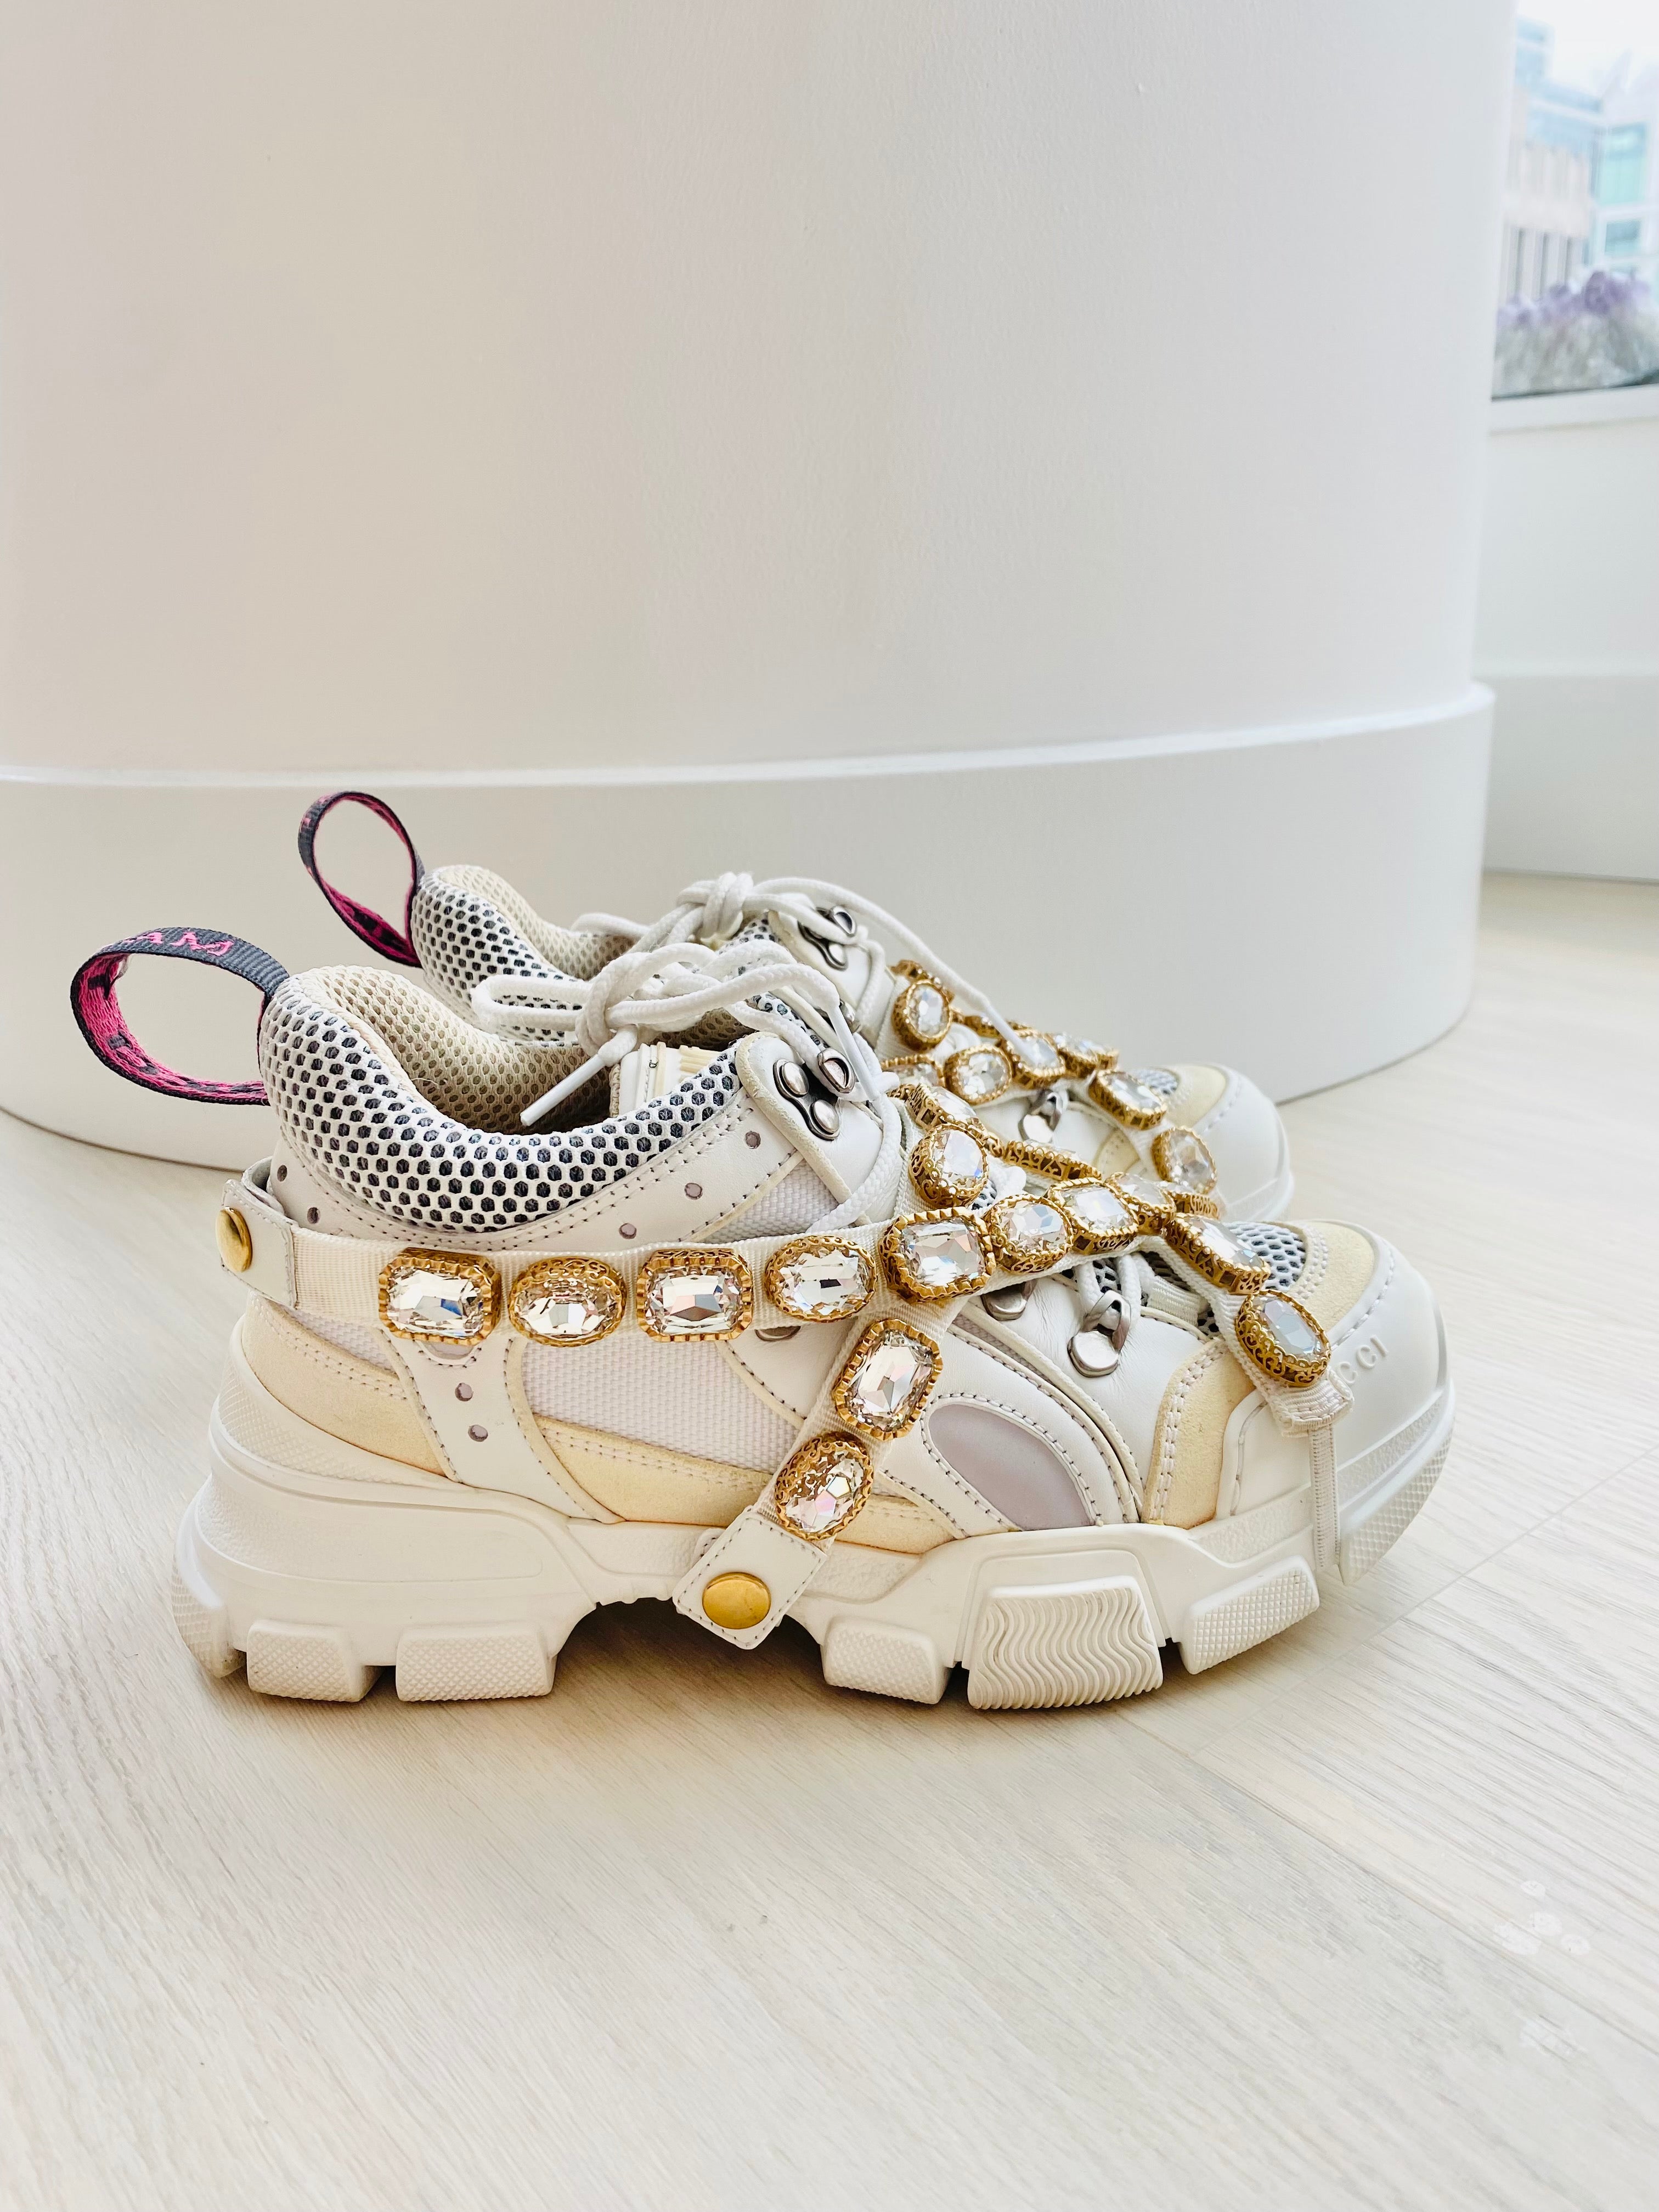 Gucci Flashtrek sneaker with removable crystals – Beccas Bags Boutique